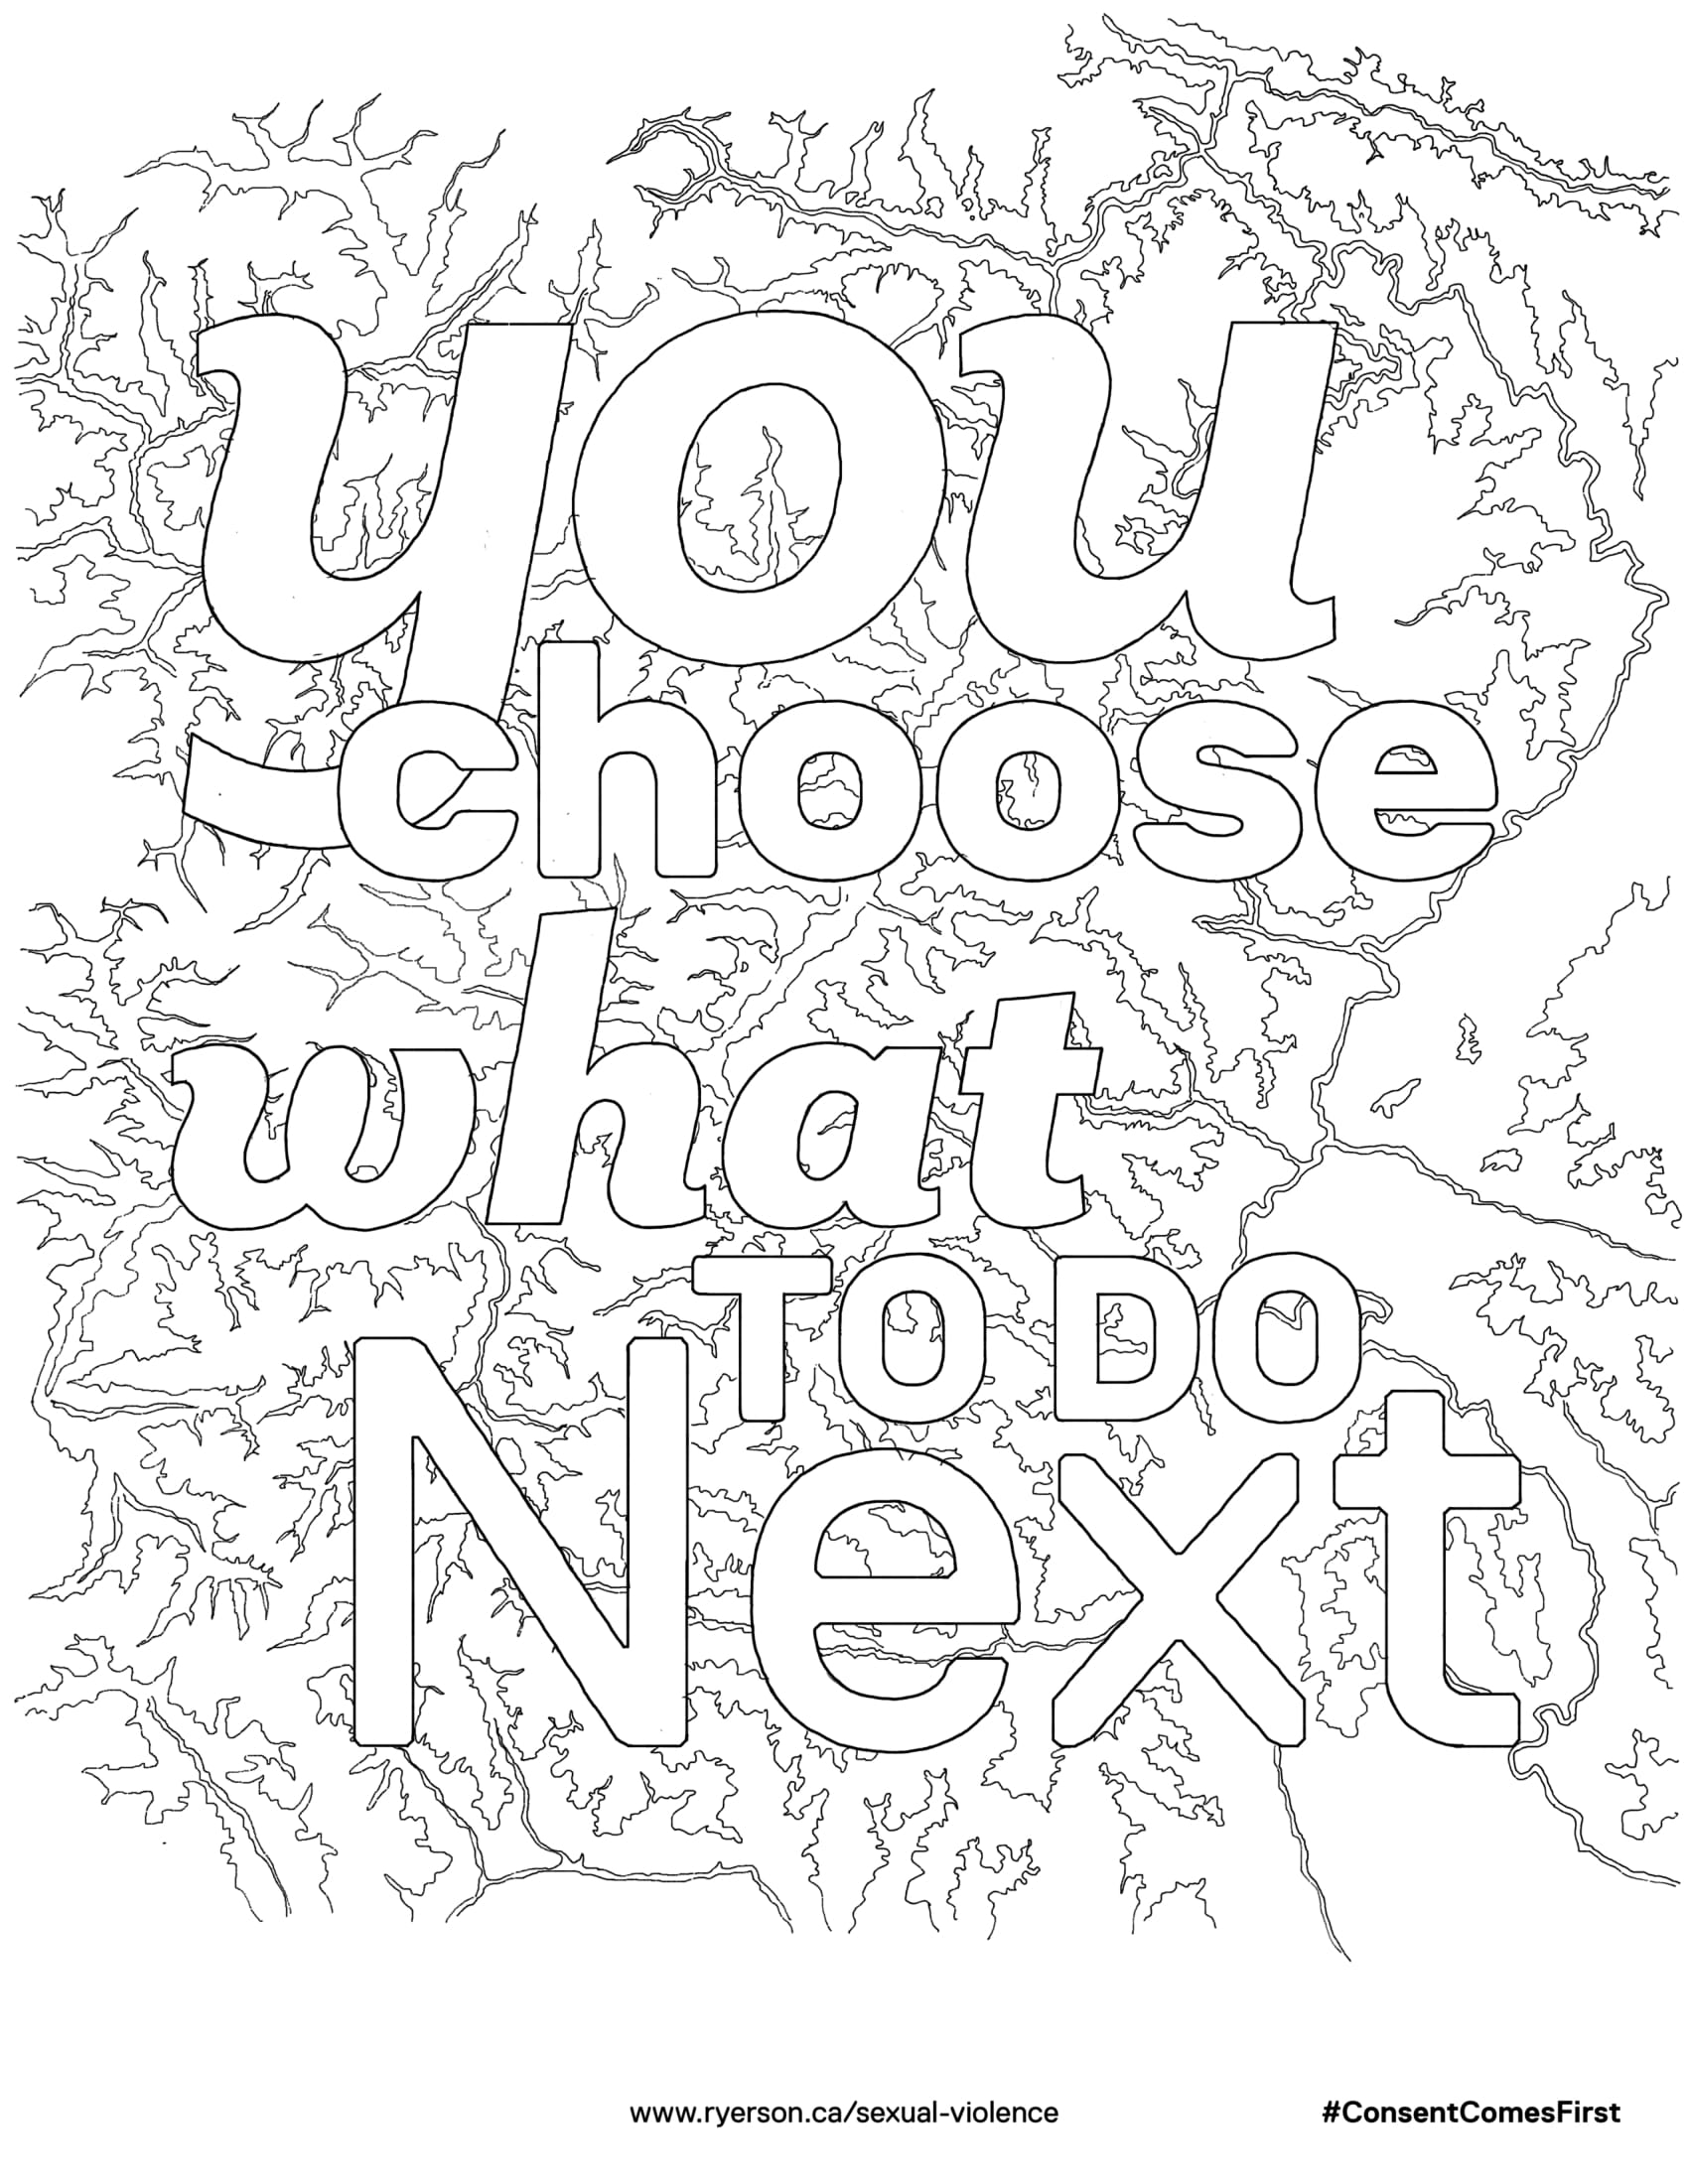 You Choose What To Do Next